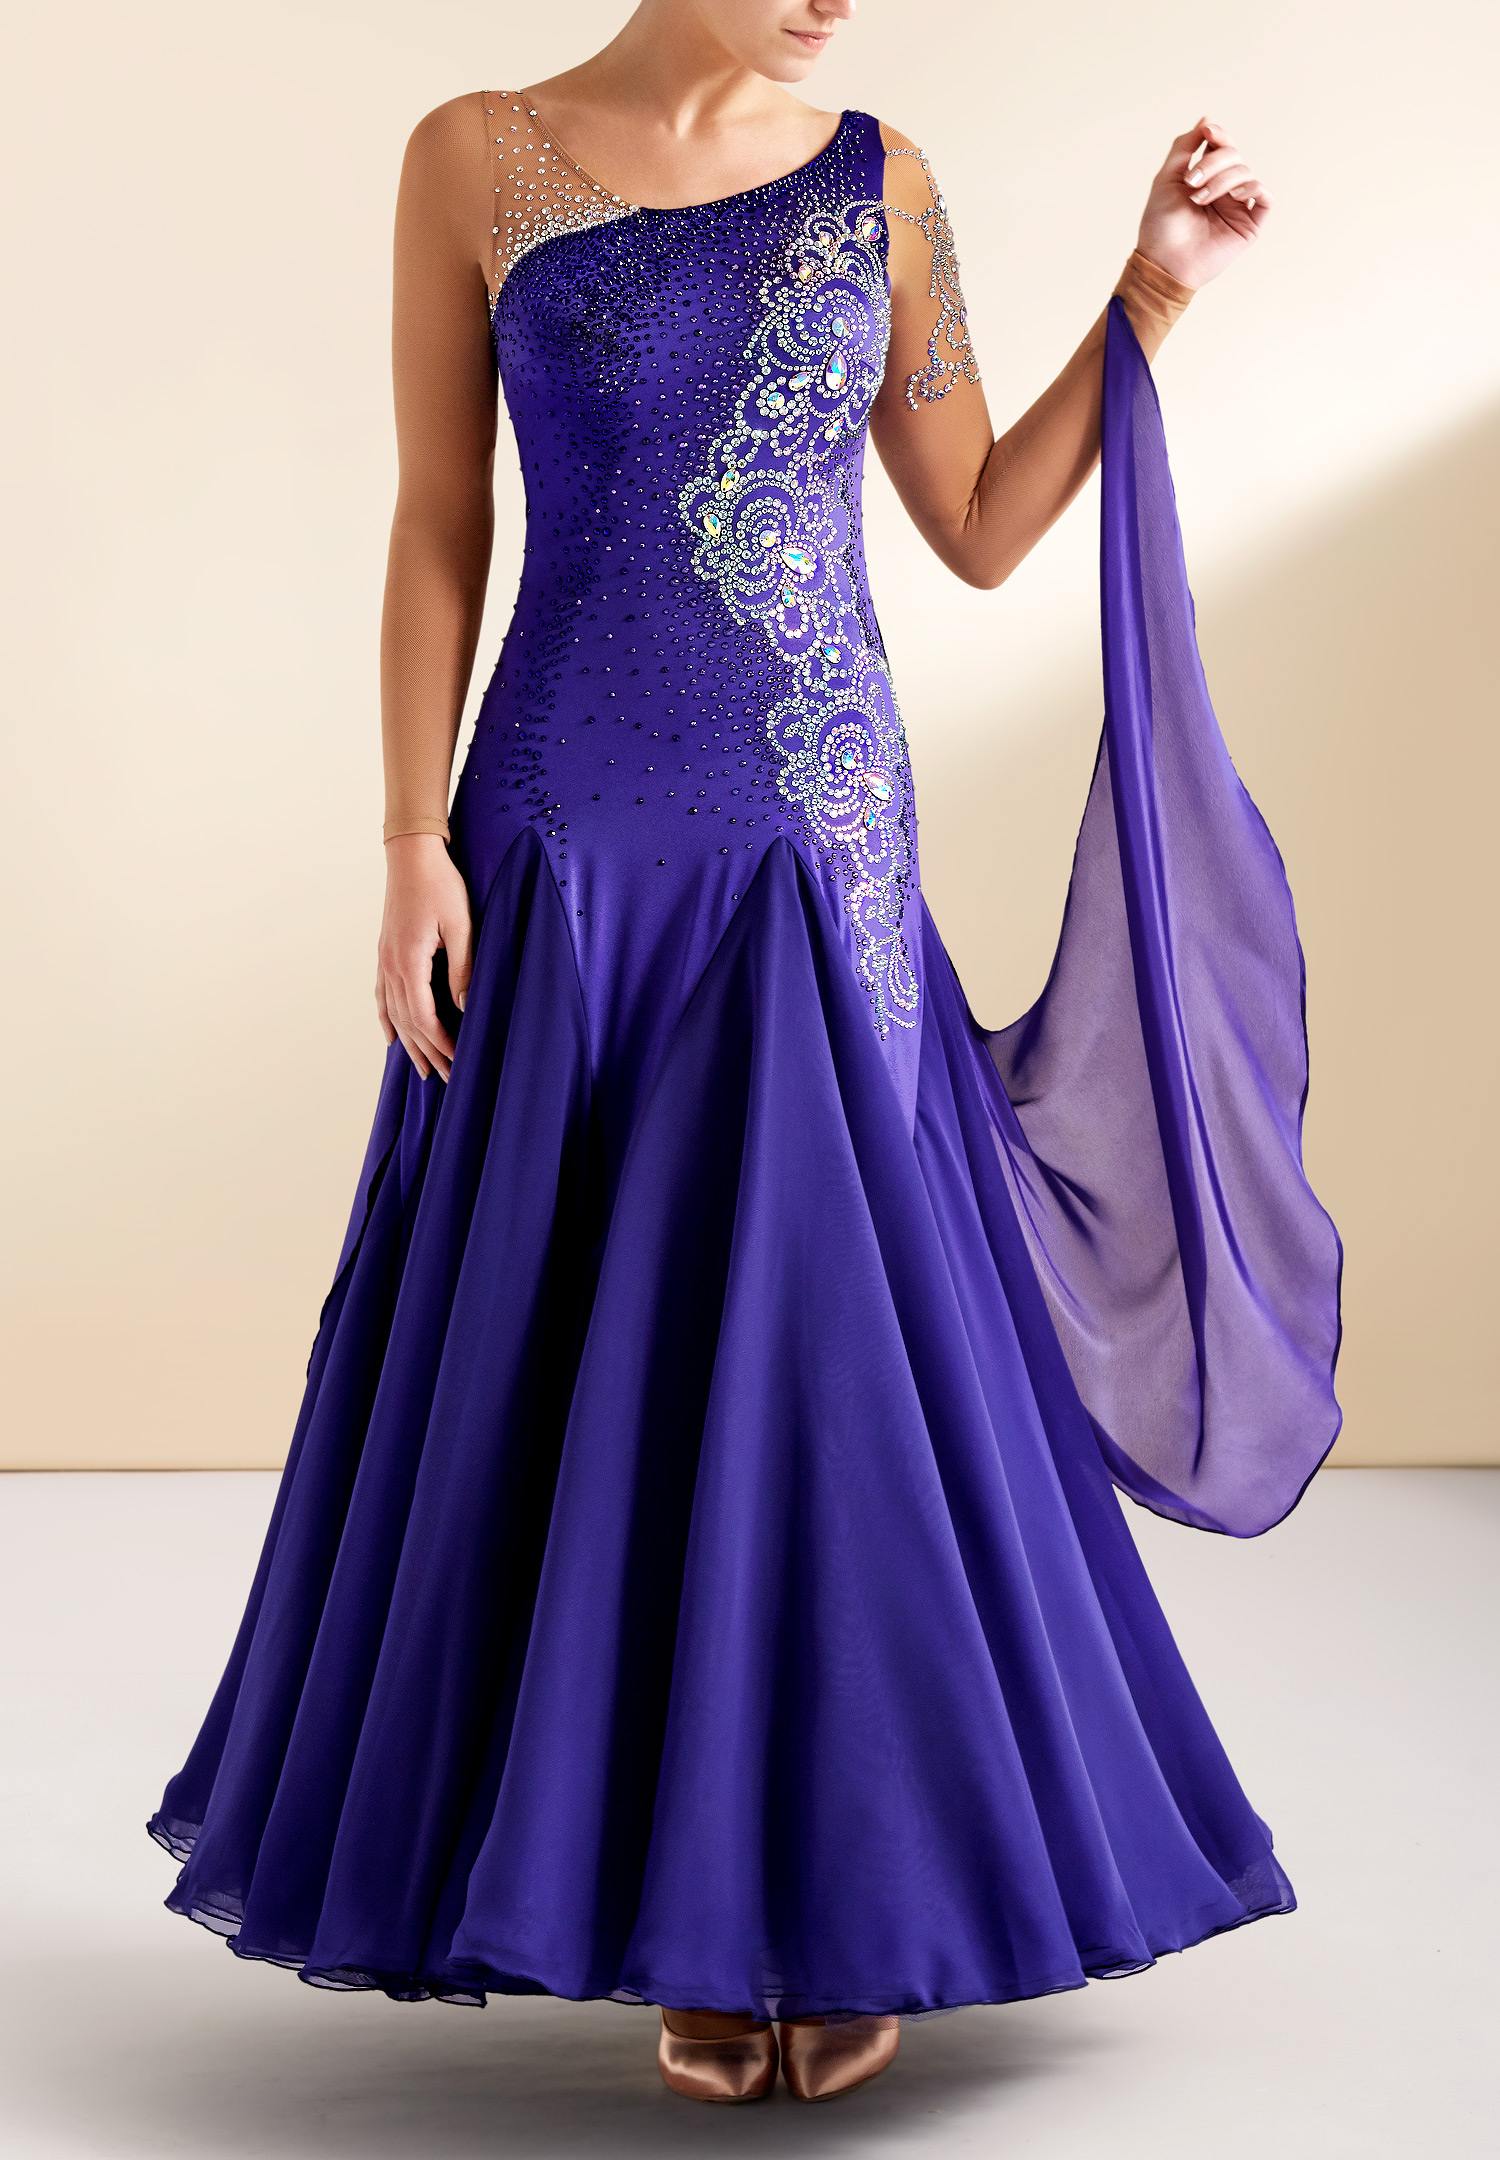 SINGLE COLOR SINGLE DESIGN PURPLE GOWN at Rs.1449/Piece in surat offer by  yct shopping